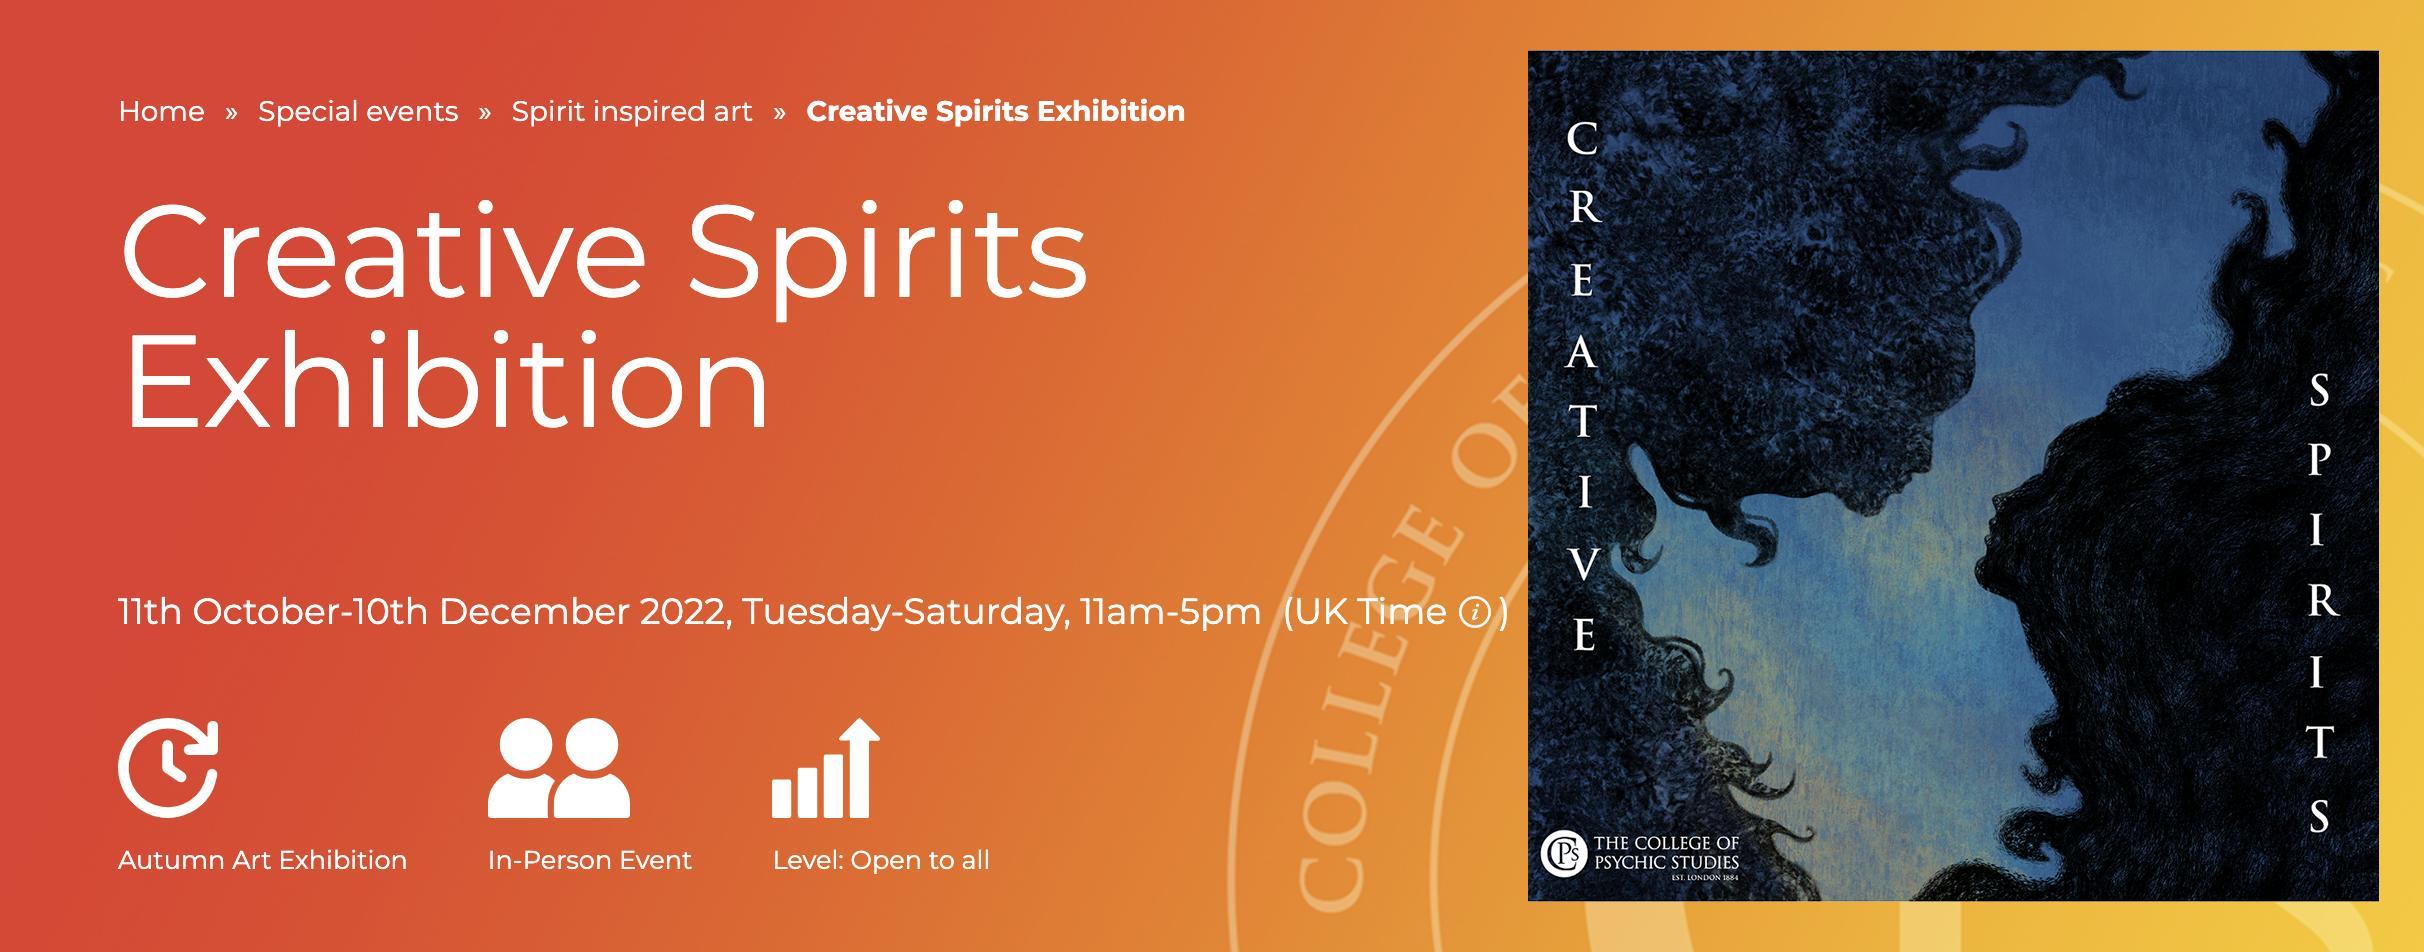 Banner for Creative Spirits exhibition, with Anna Mary Howitt Watts' work